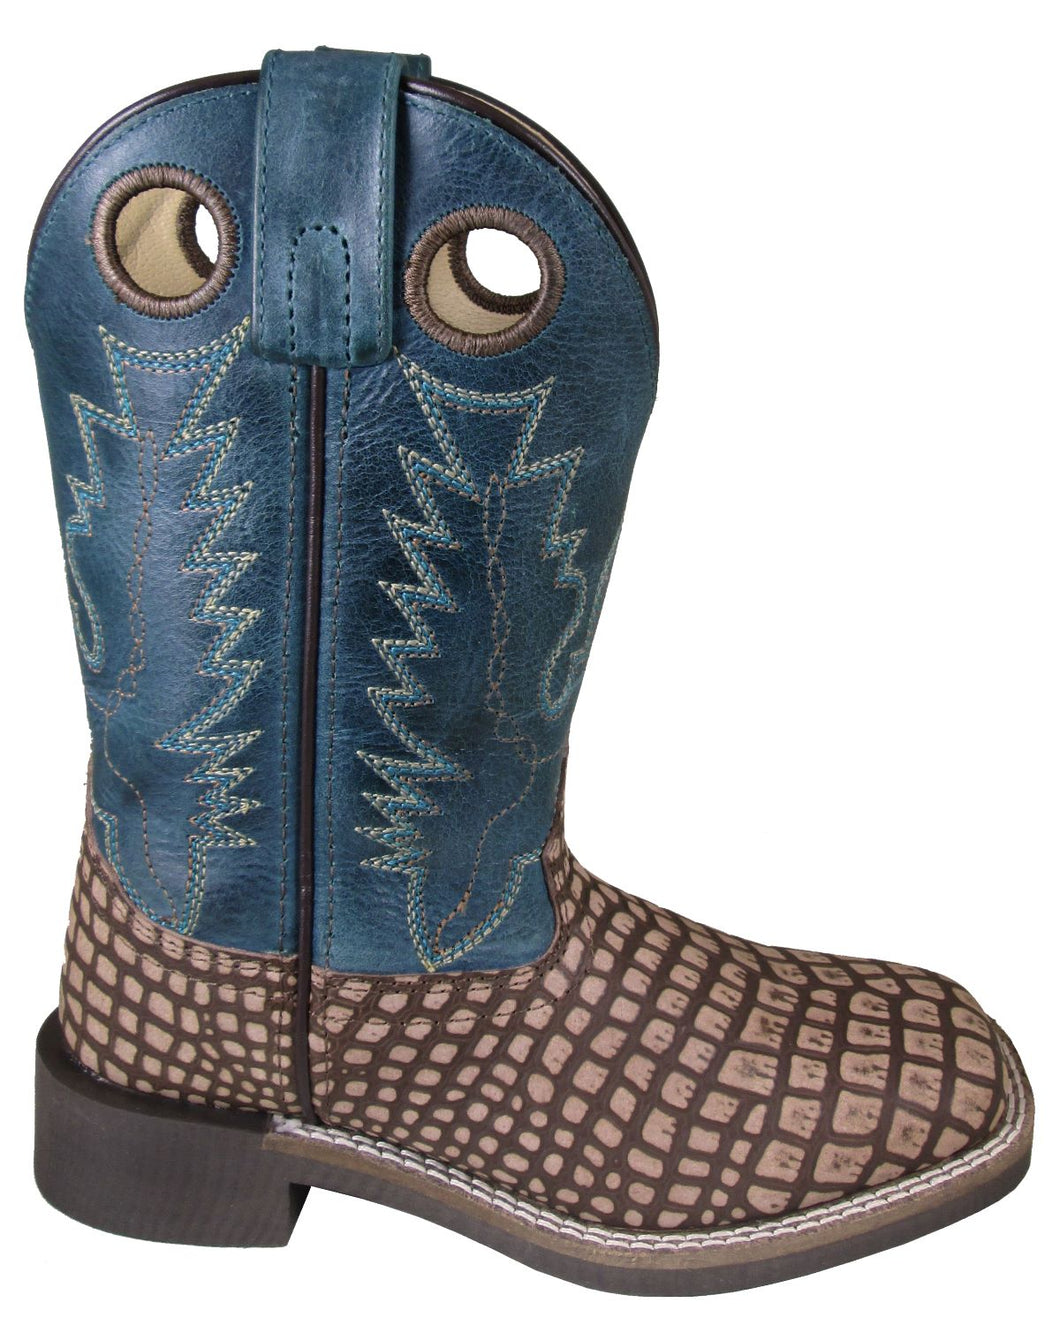 'Smoky Mountain' Youth Reptile Western Square Toe - Vintage Brown / Vintage Blue